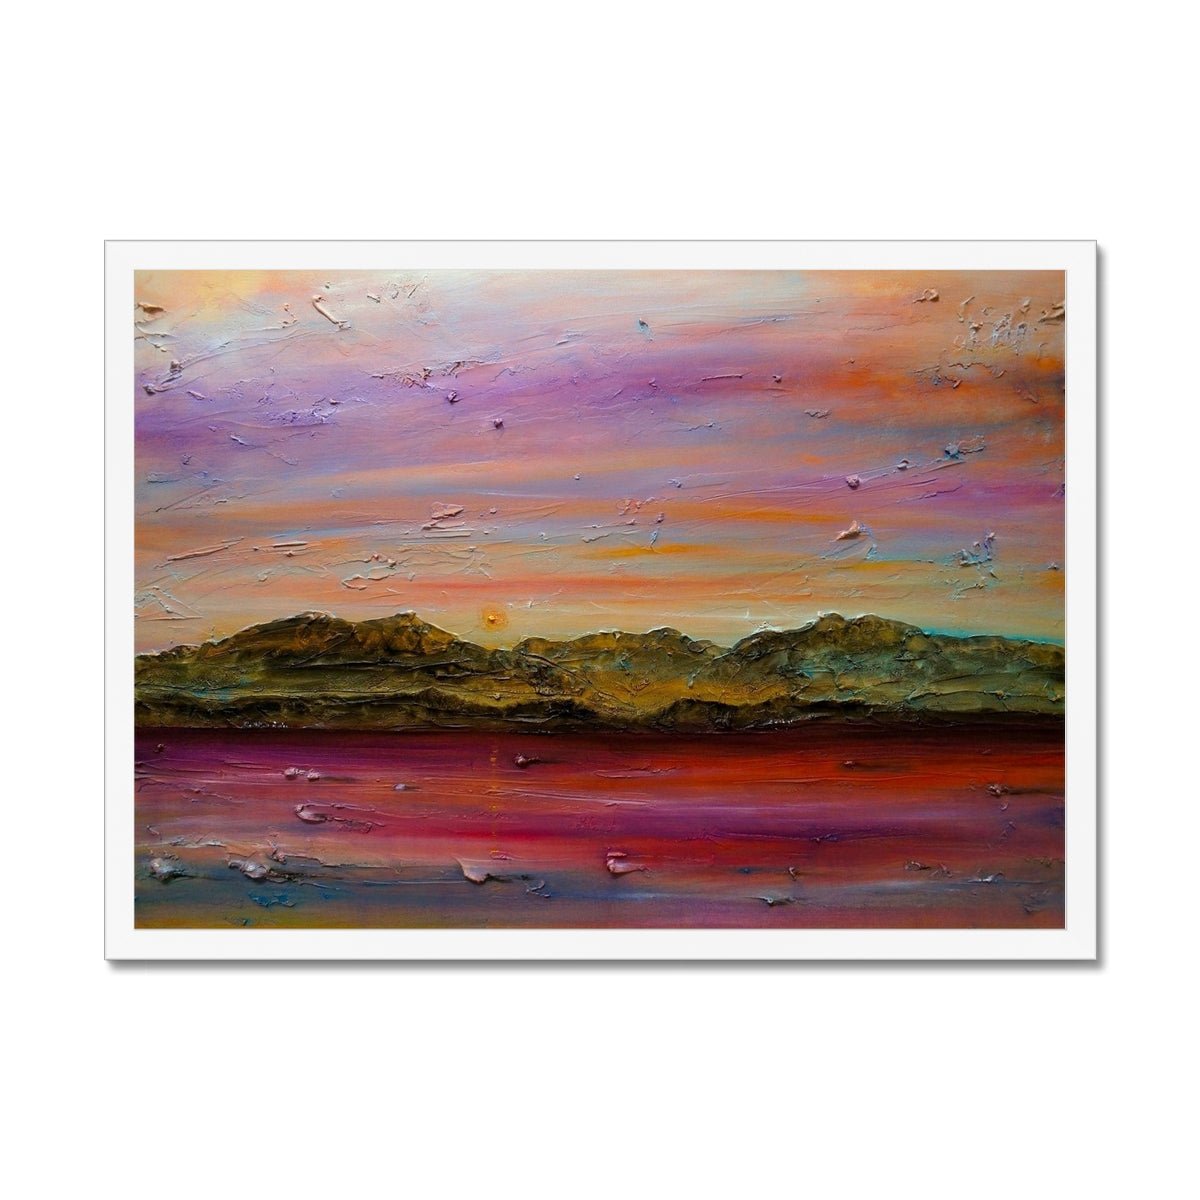 Arran Autumn Dusk Painting | Framed Prints From Scotland-Framed Prints-Arran Art Gallery-A2 Landscape-White Frame-Paintings, Prints, Homeware, Art Gifts From Scotland By Scottish Artist Kevin Hunter